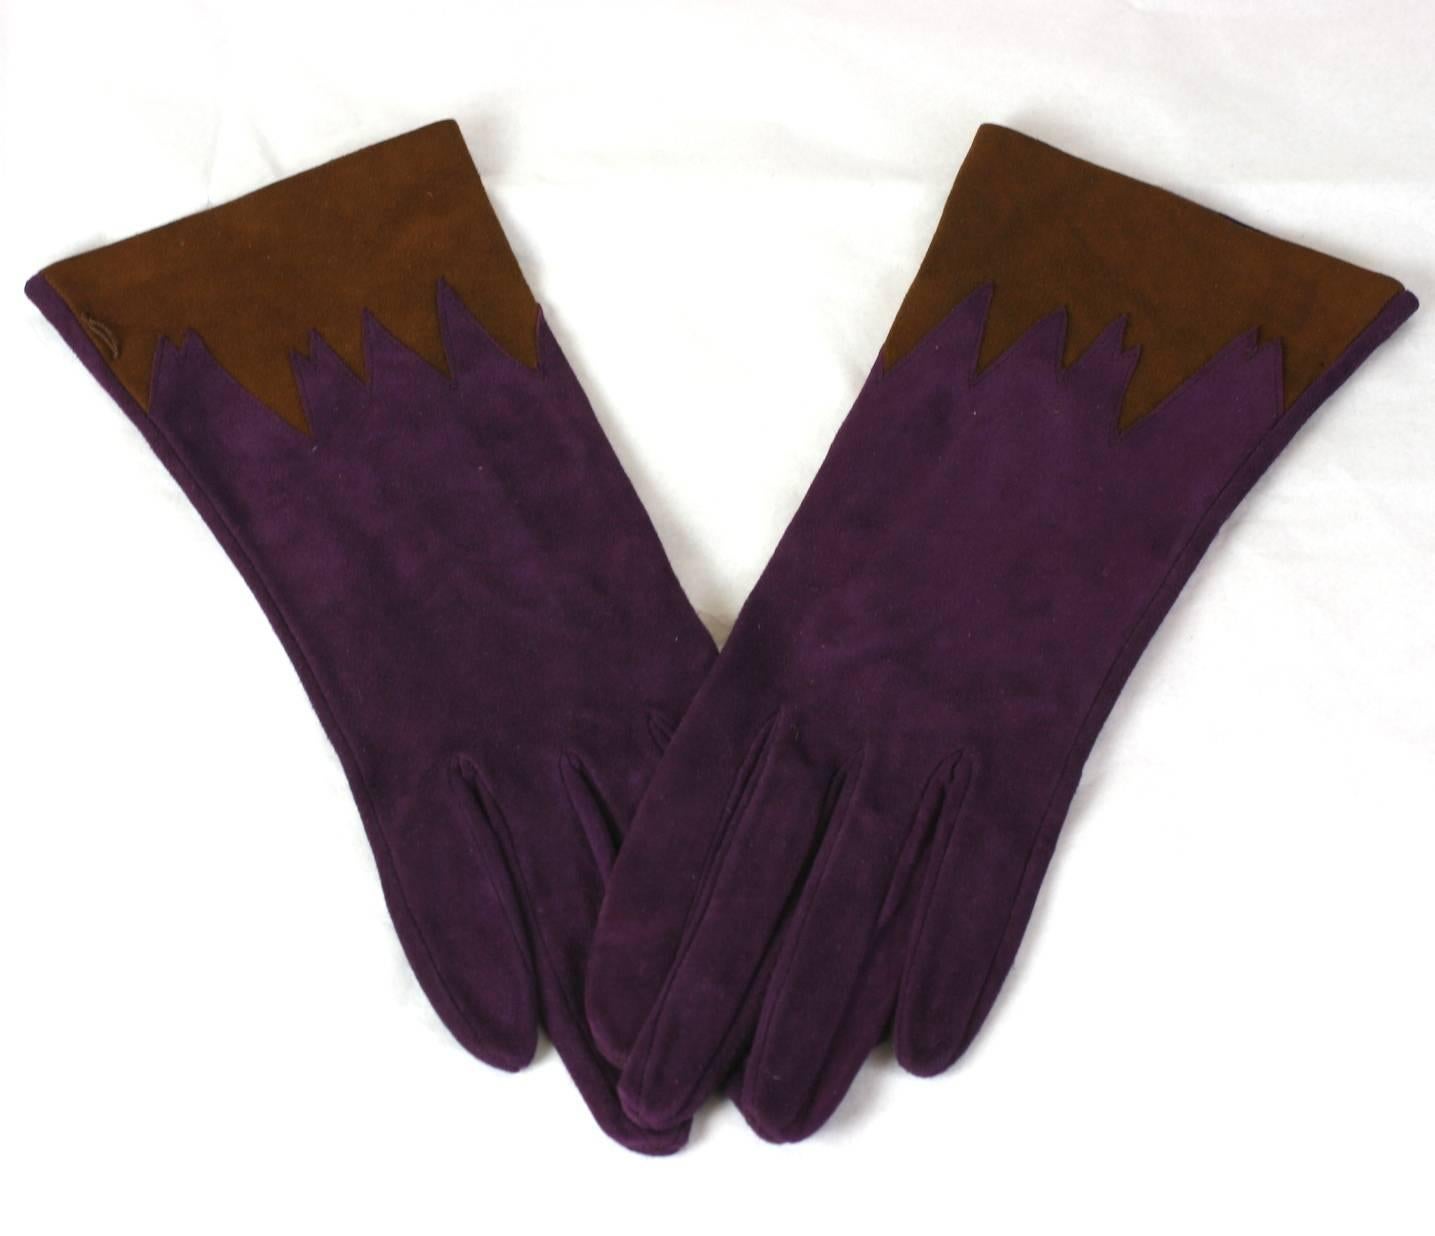 Violet suede gloves with brown suede intarsia inserts at wrists. 
Excellent Condition. Italy 1990's. Size 7.